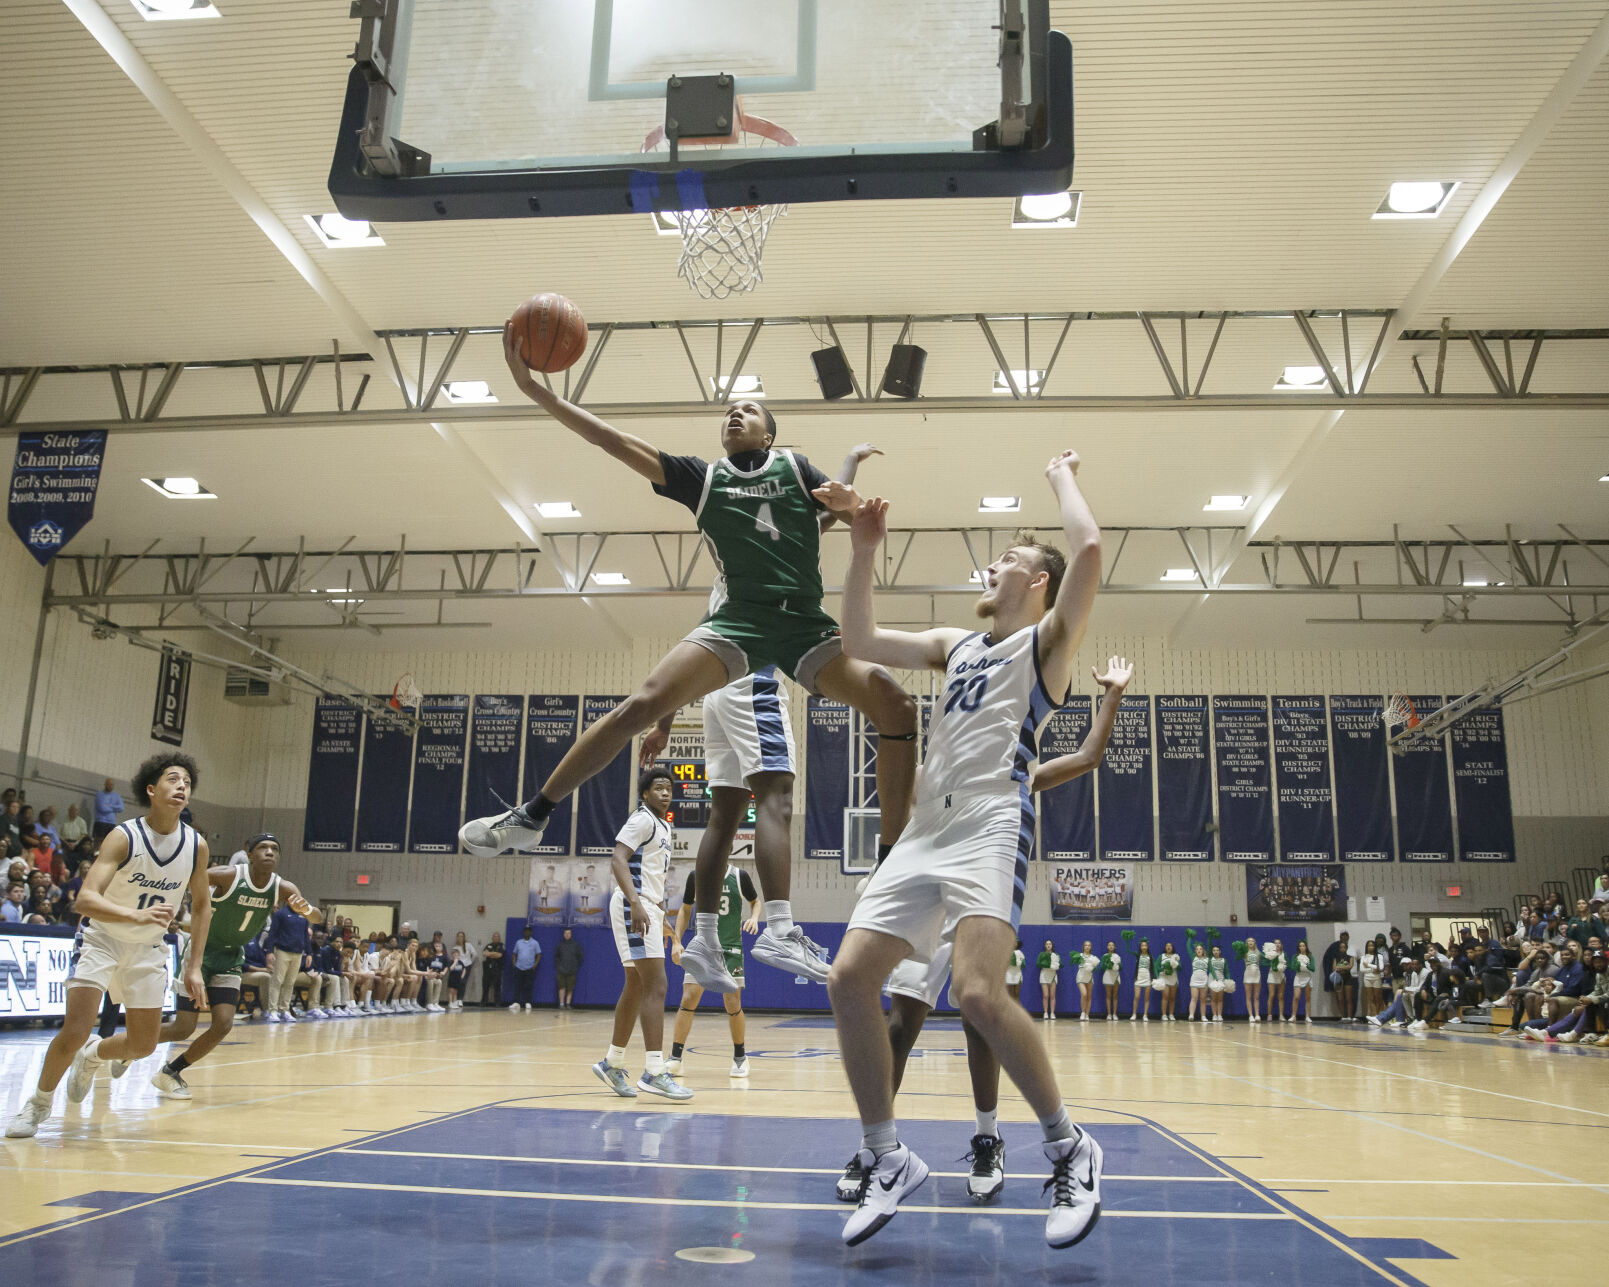 Mike Parlow’s 19-Point Heroics Propel Slidell to Victory Over Northshore